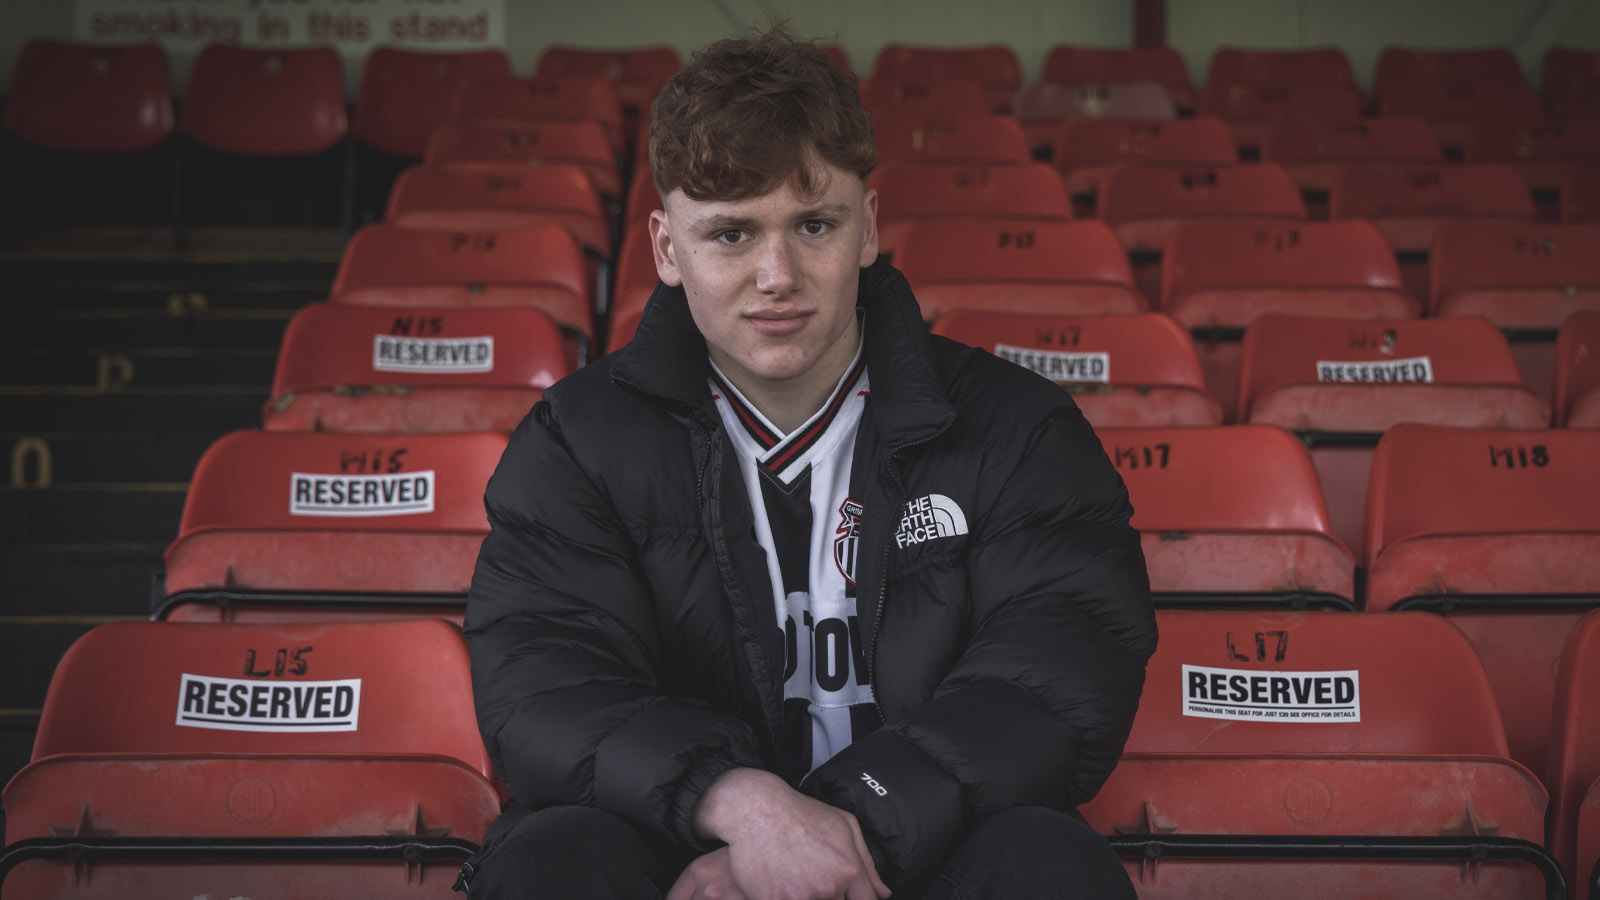 Young fan sat in the stands at blundell park